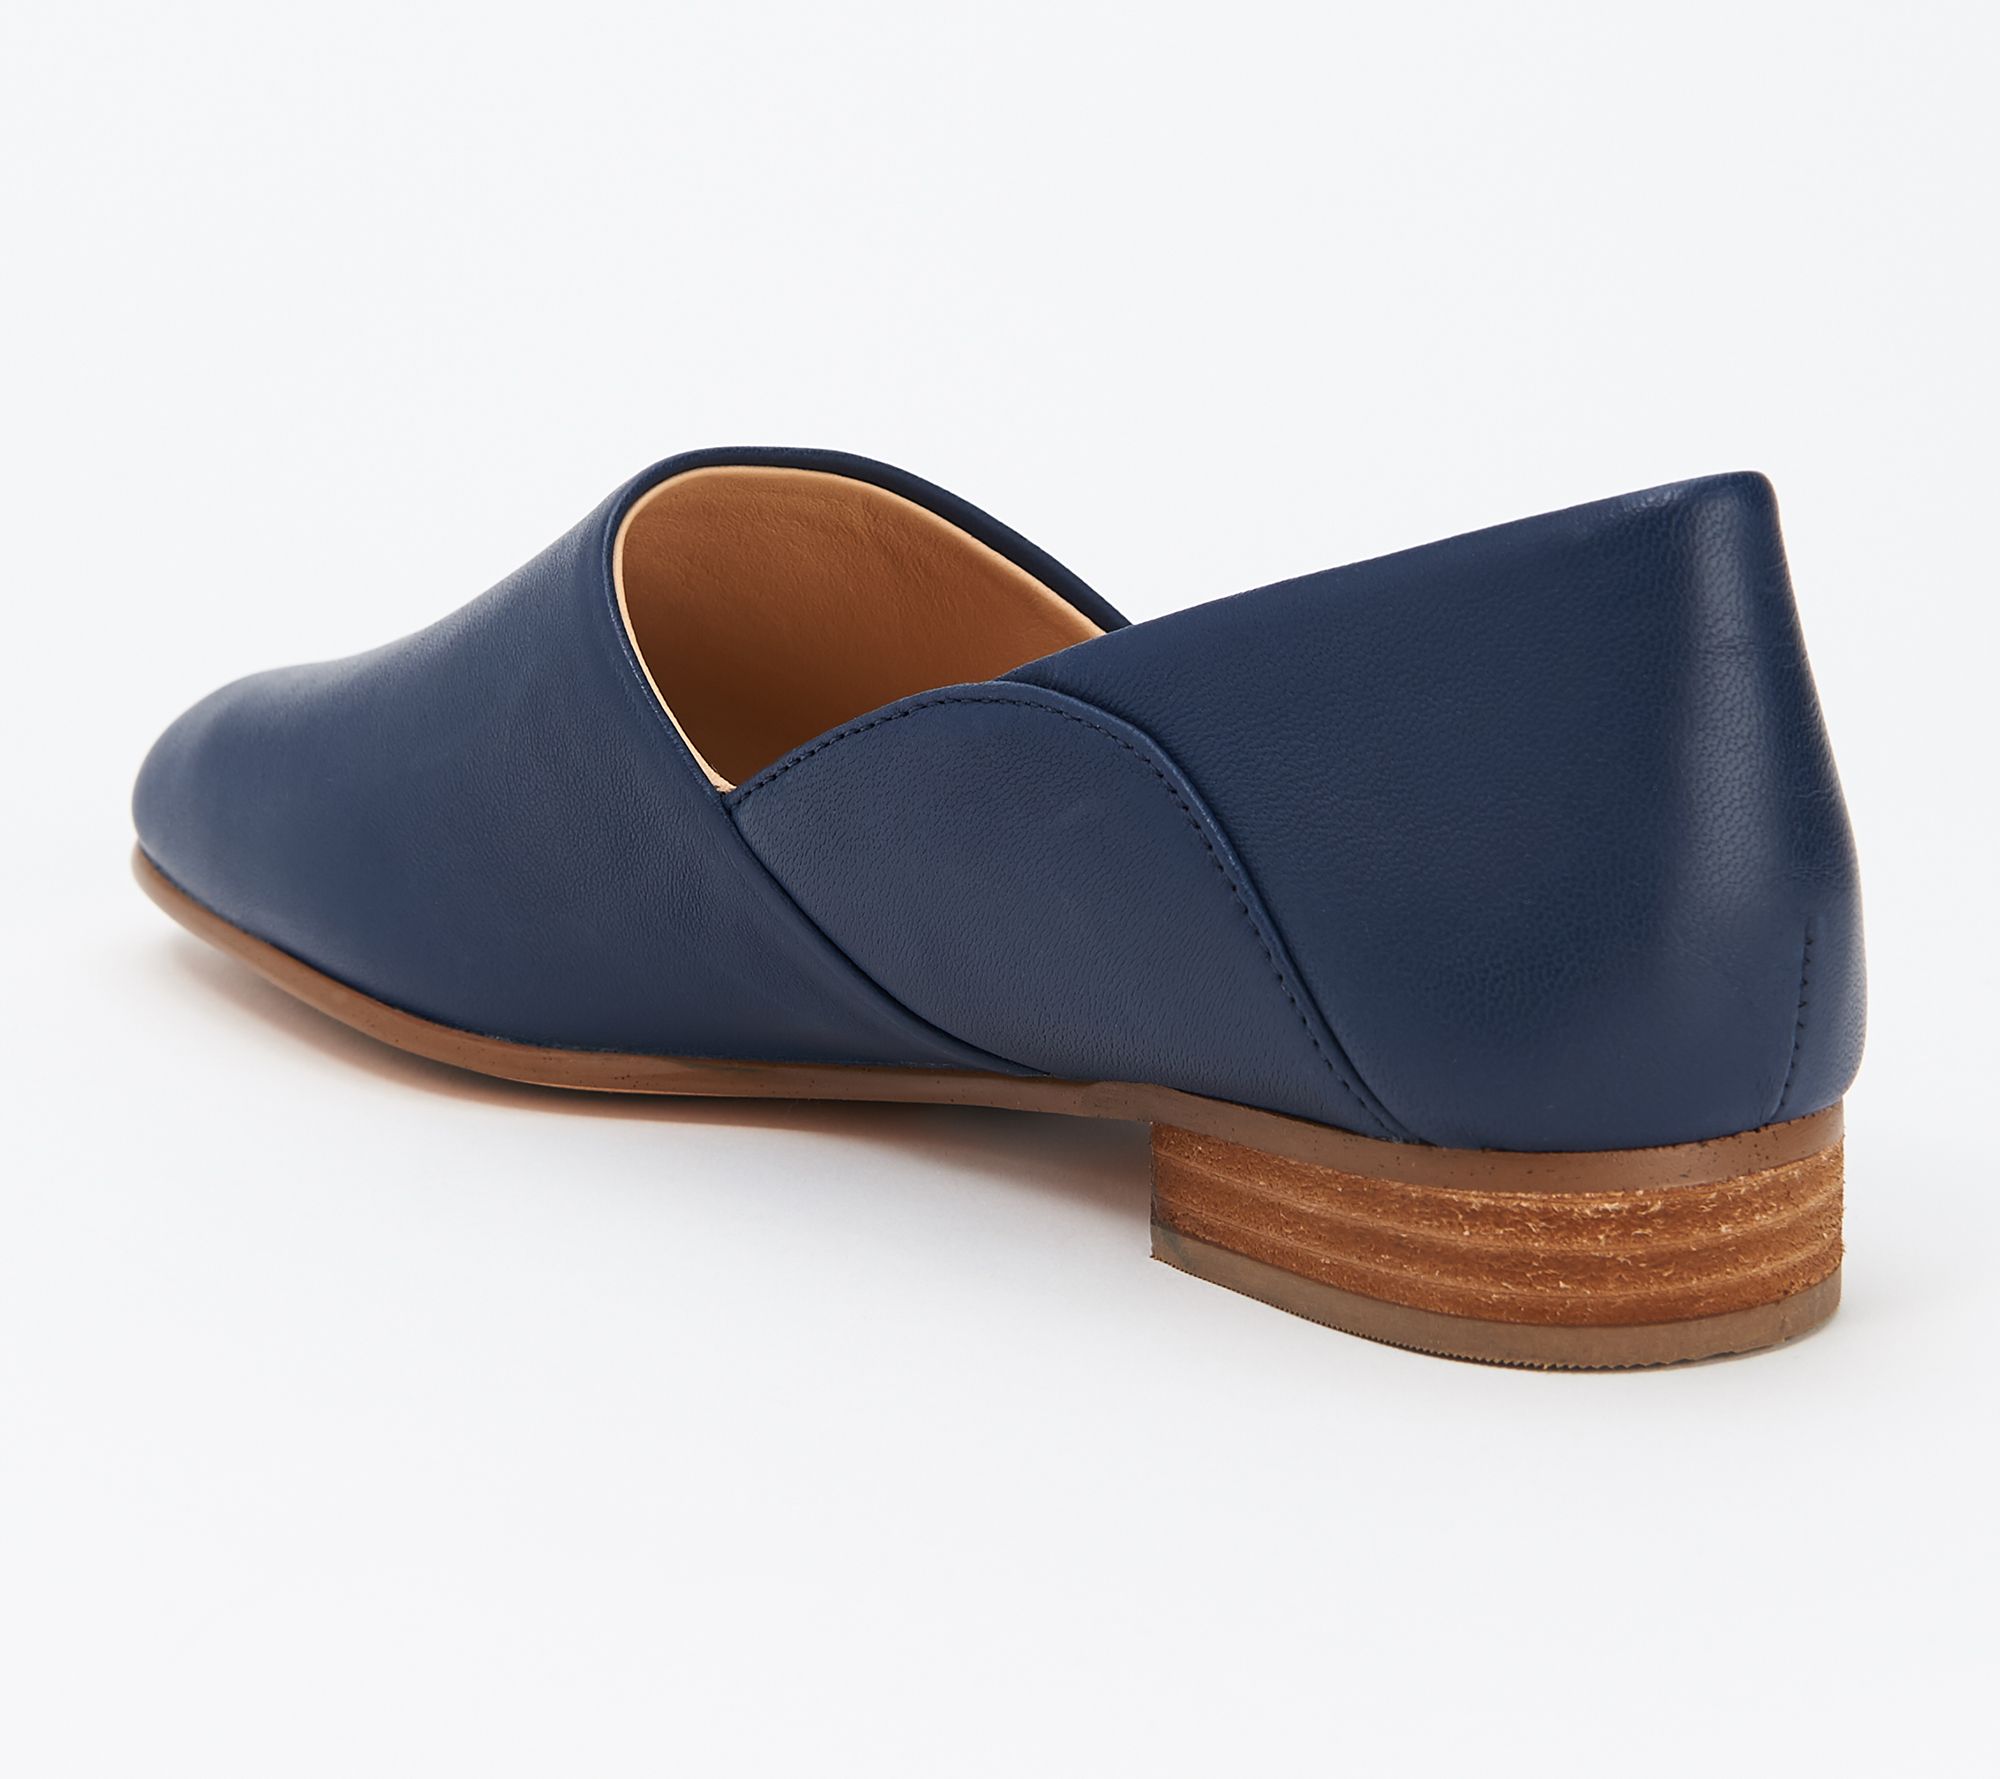 Leather & Suede Slip-On Shoes - Pure Tone - QVC.com